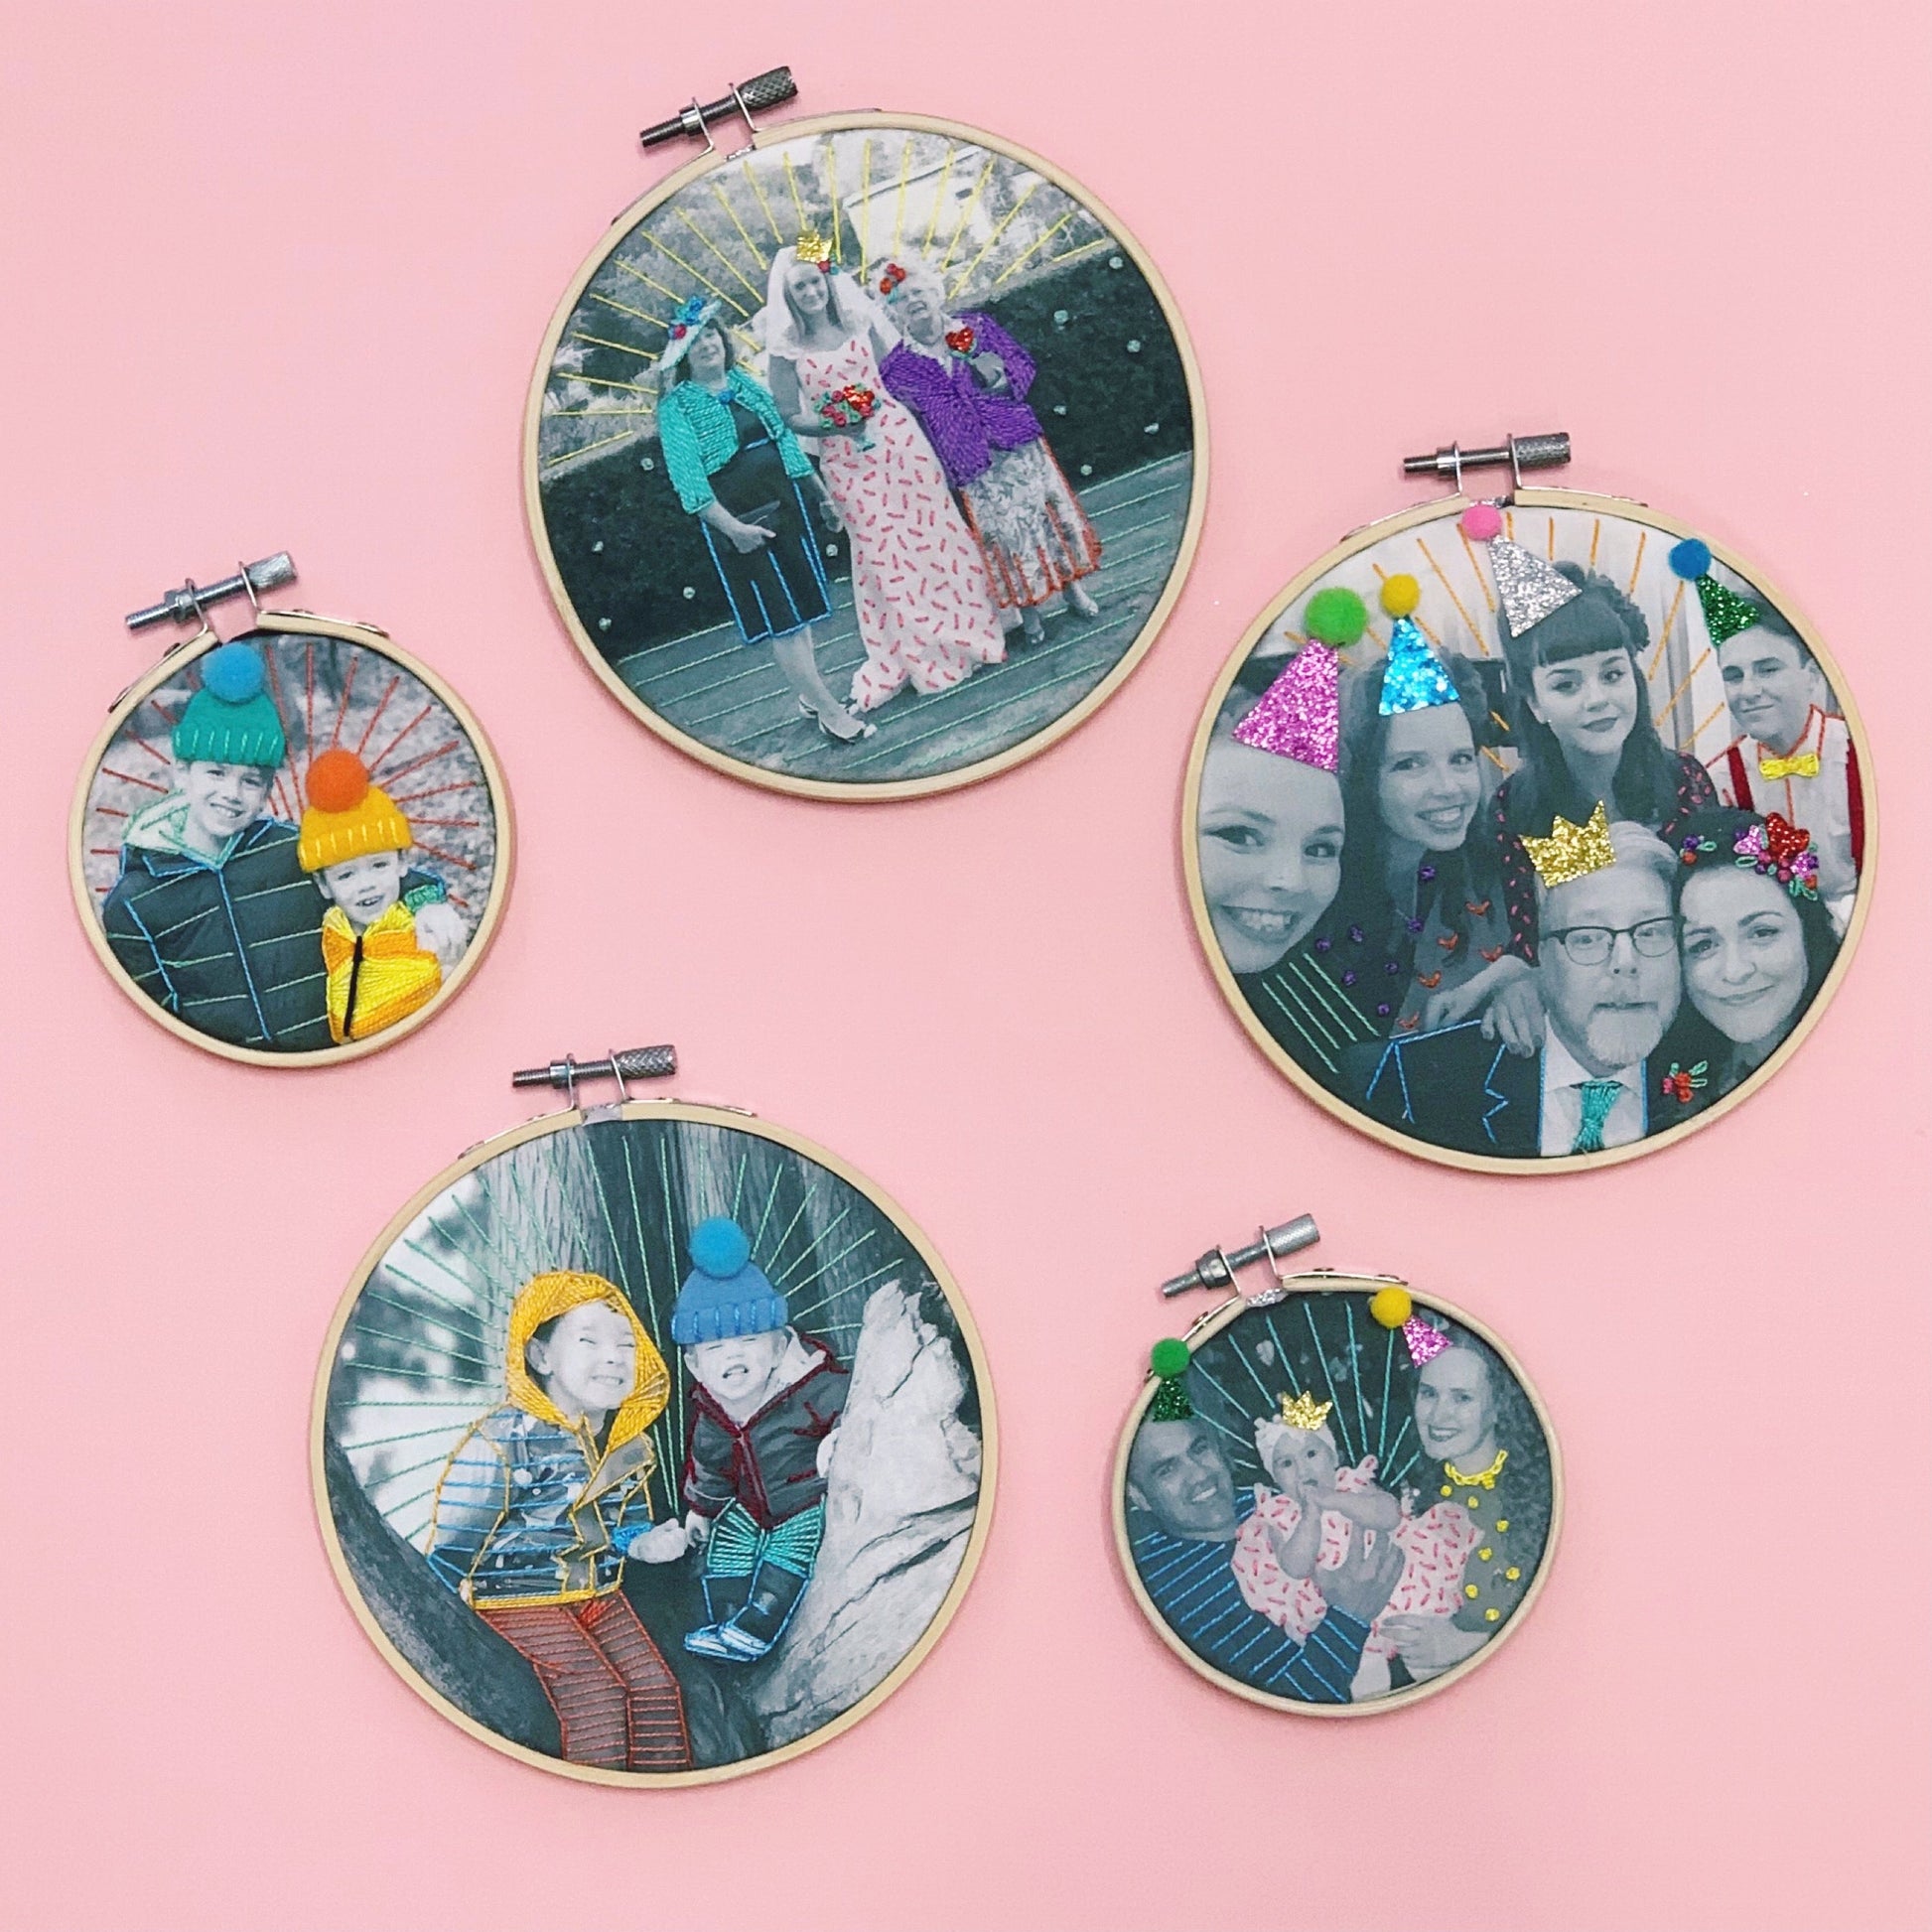 Fun and colourful personalised photo gift